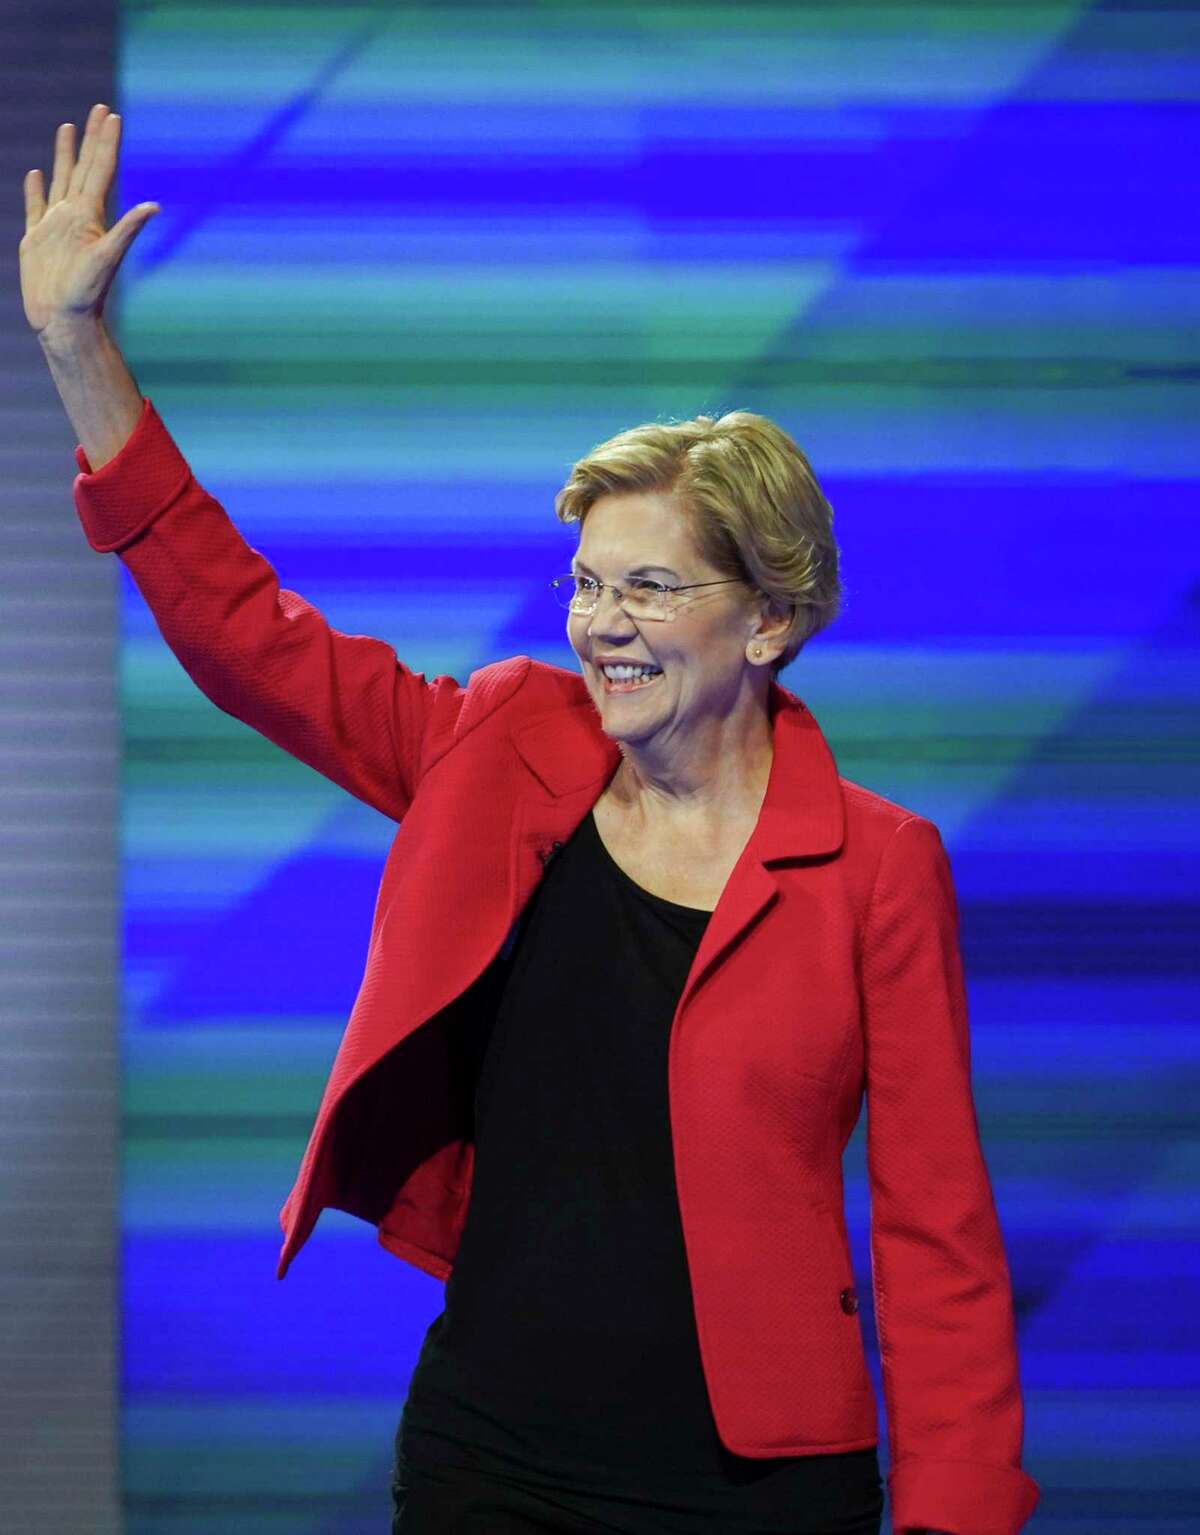 Democratic presidential candidate Sen. Elizabeth Warren, D-Mass., takes the stage for the Democratic Debate at Texas Southern University's Health & Physical Education Center Thursday, Sept. 12, 2019, in Houston.